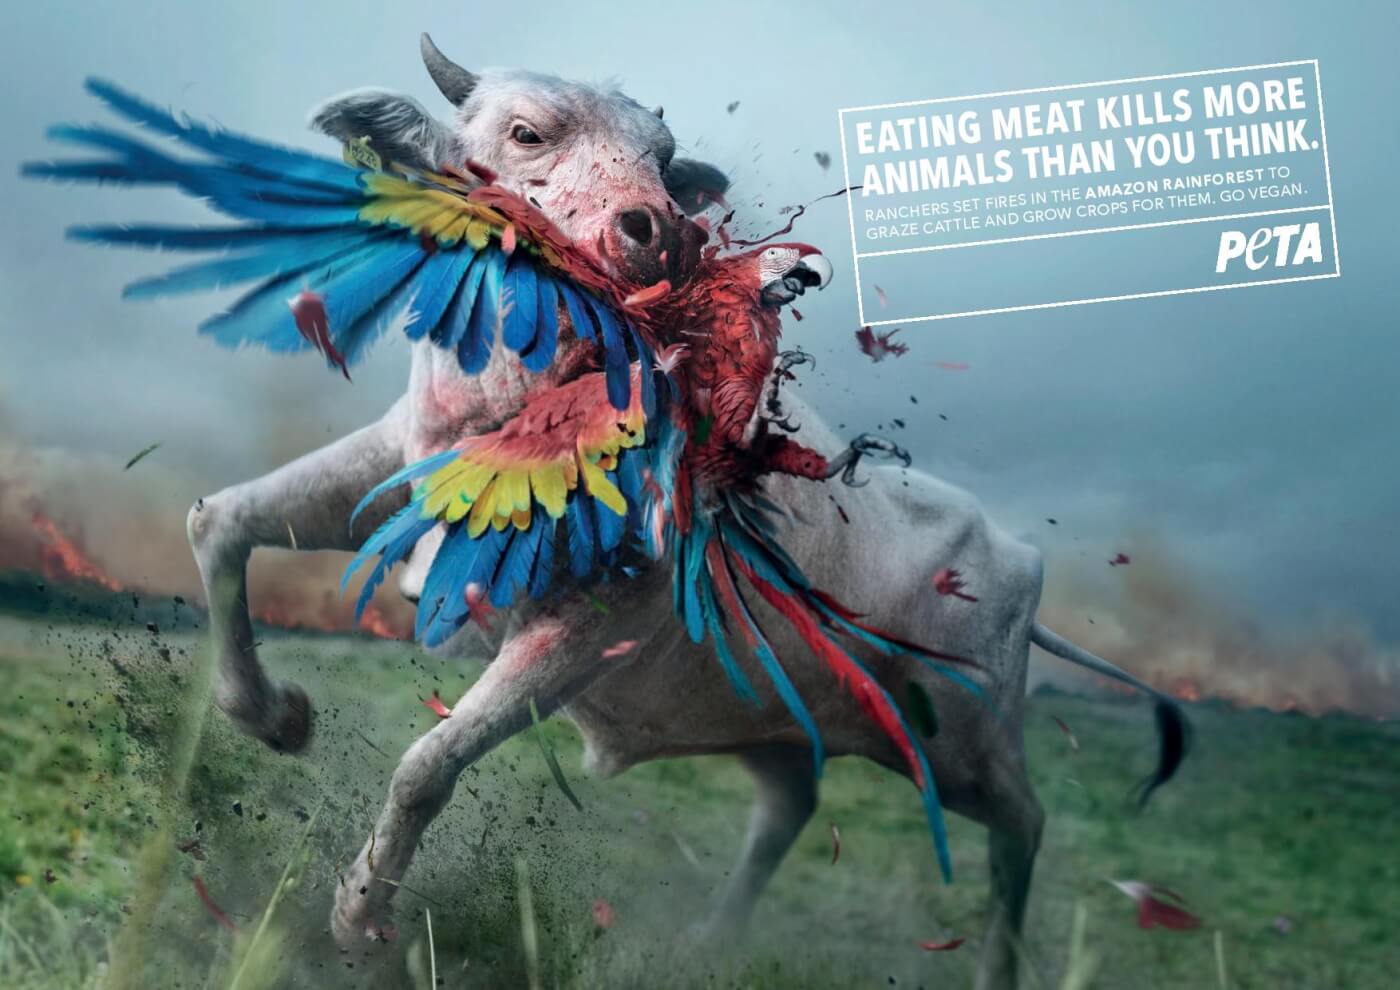 PETA's New Ad Blames Meat-Eaters for Amazon Fires